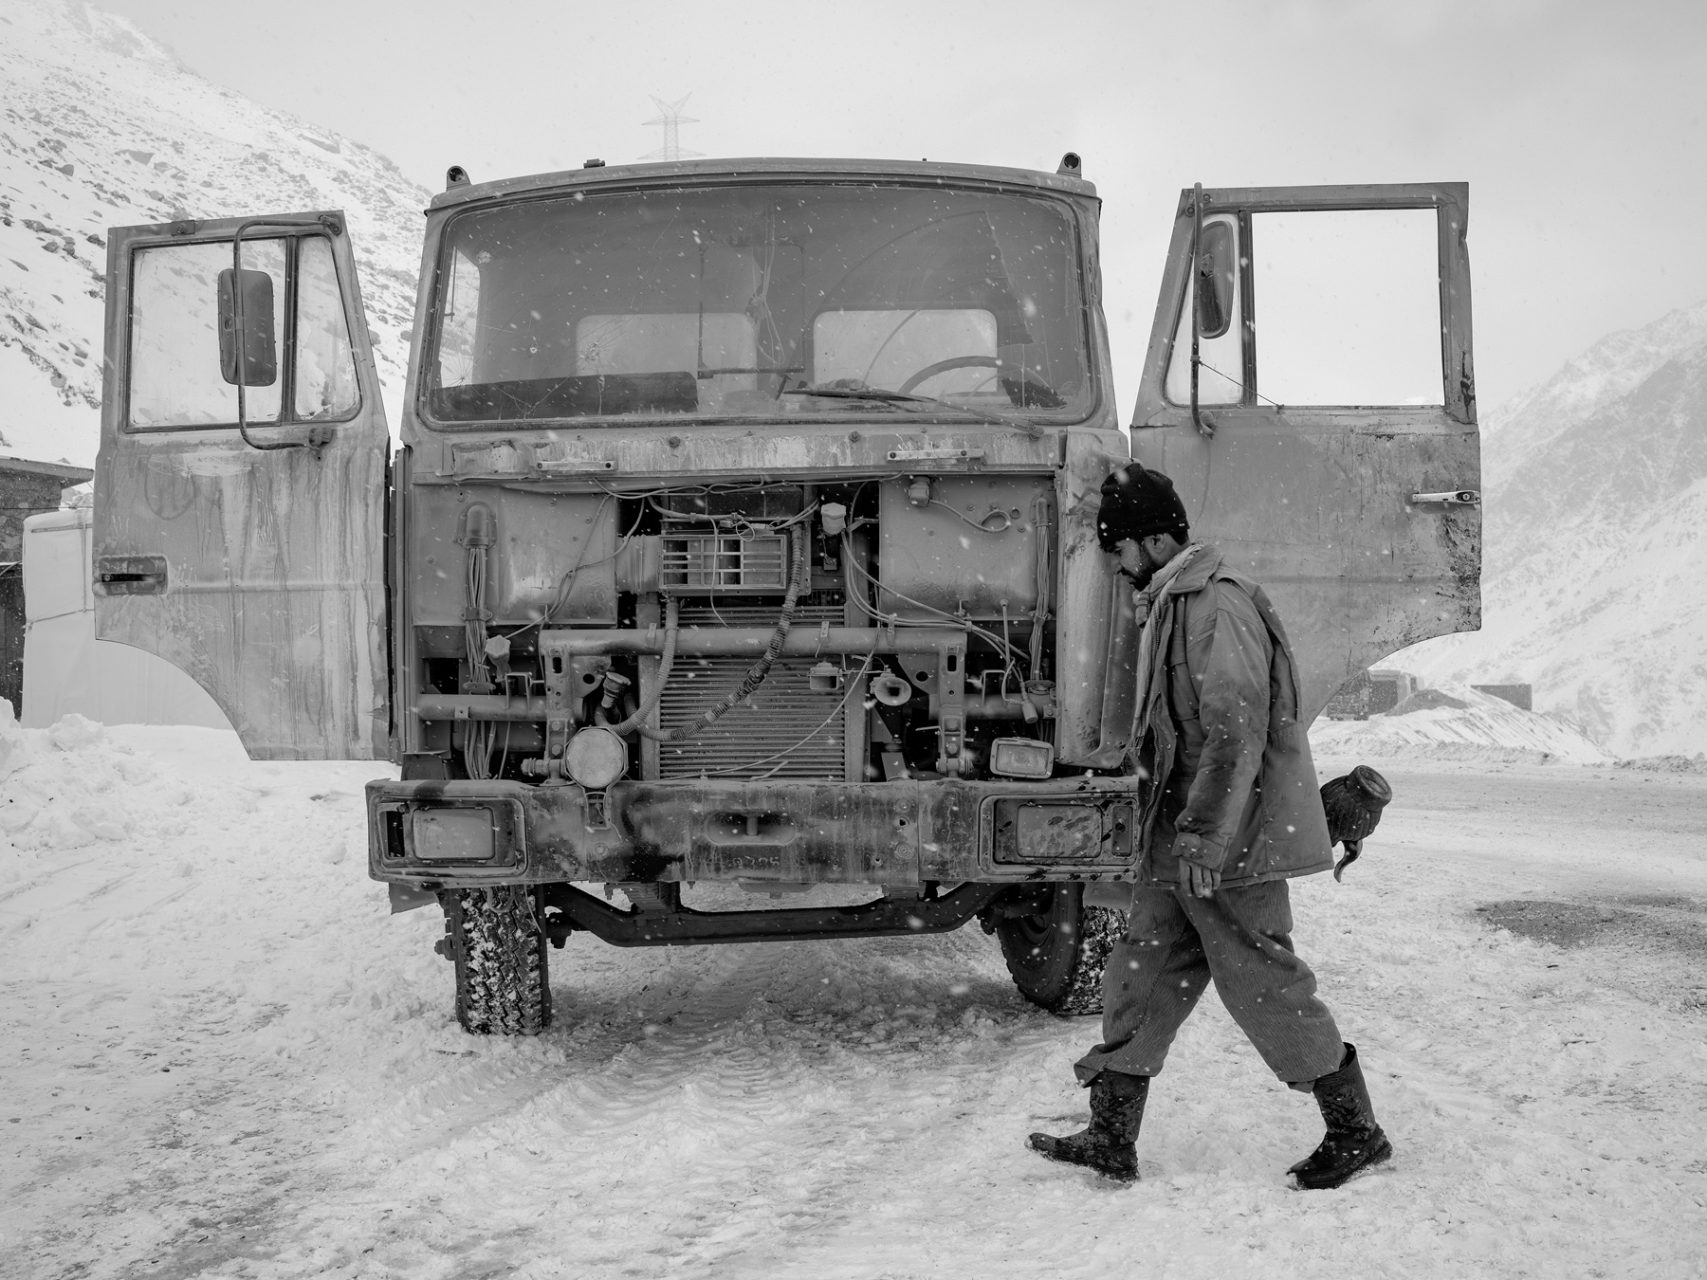 Morid, a specialised service worker of the Salang tunnel directorate prepares his the water sprinkling truck. The
old soviet built septic tank truck has been converted into a water sprinkler in order to daily wet the unpaved surface of the tunnel avoiding sand raising in the air and polluting the sight.